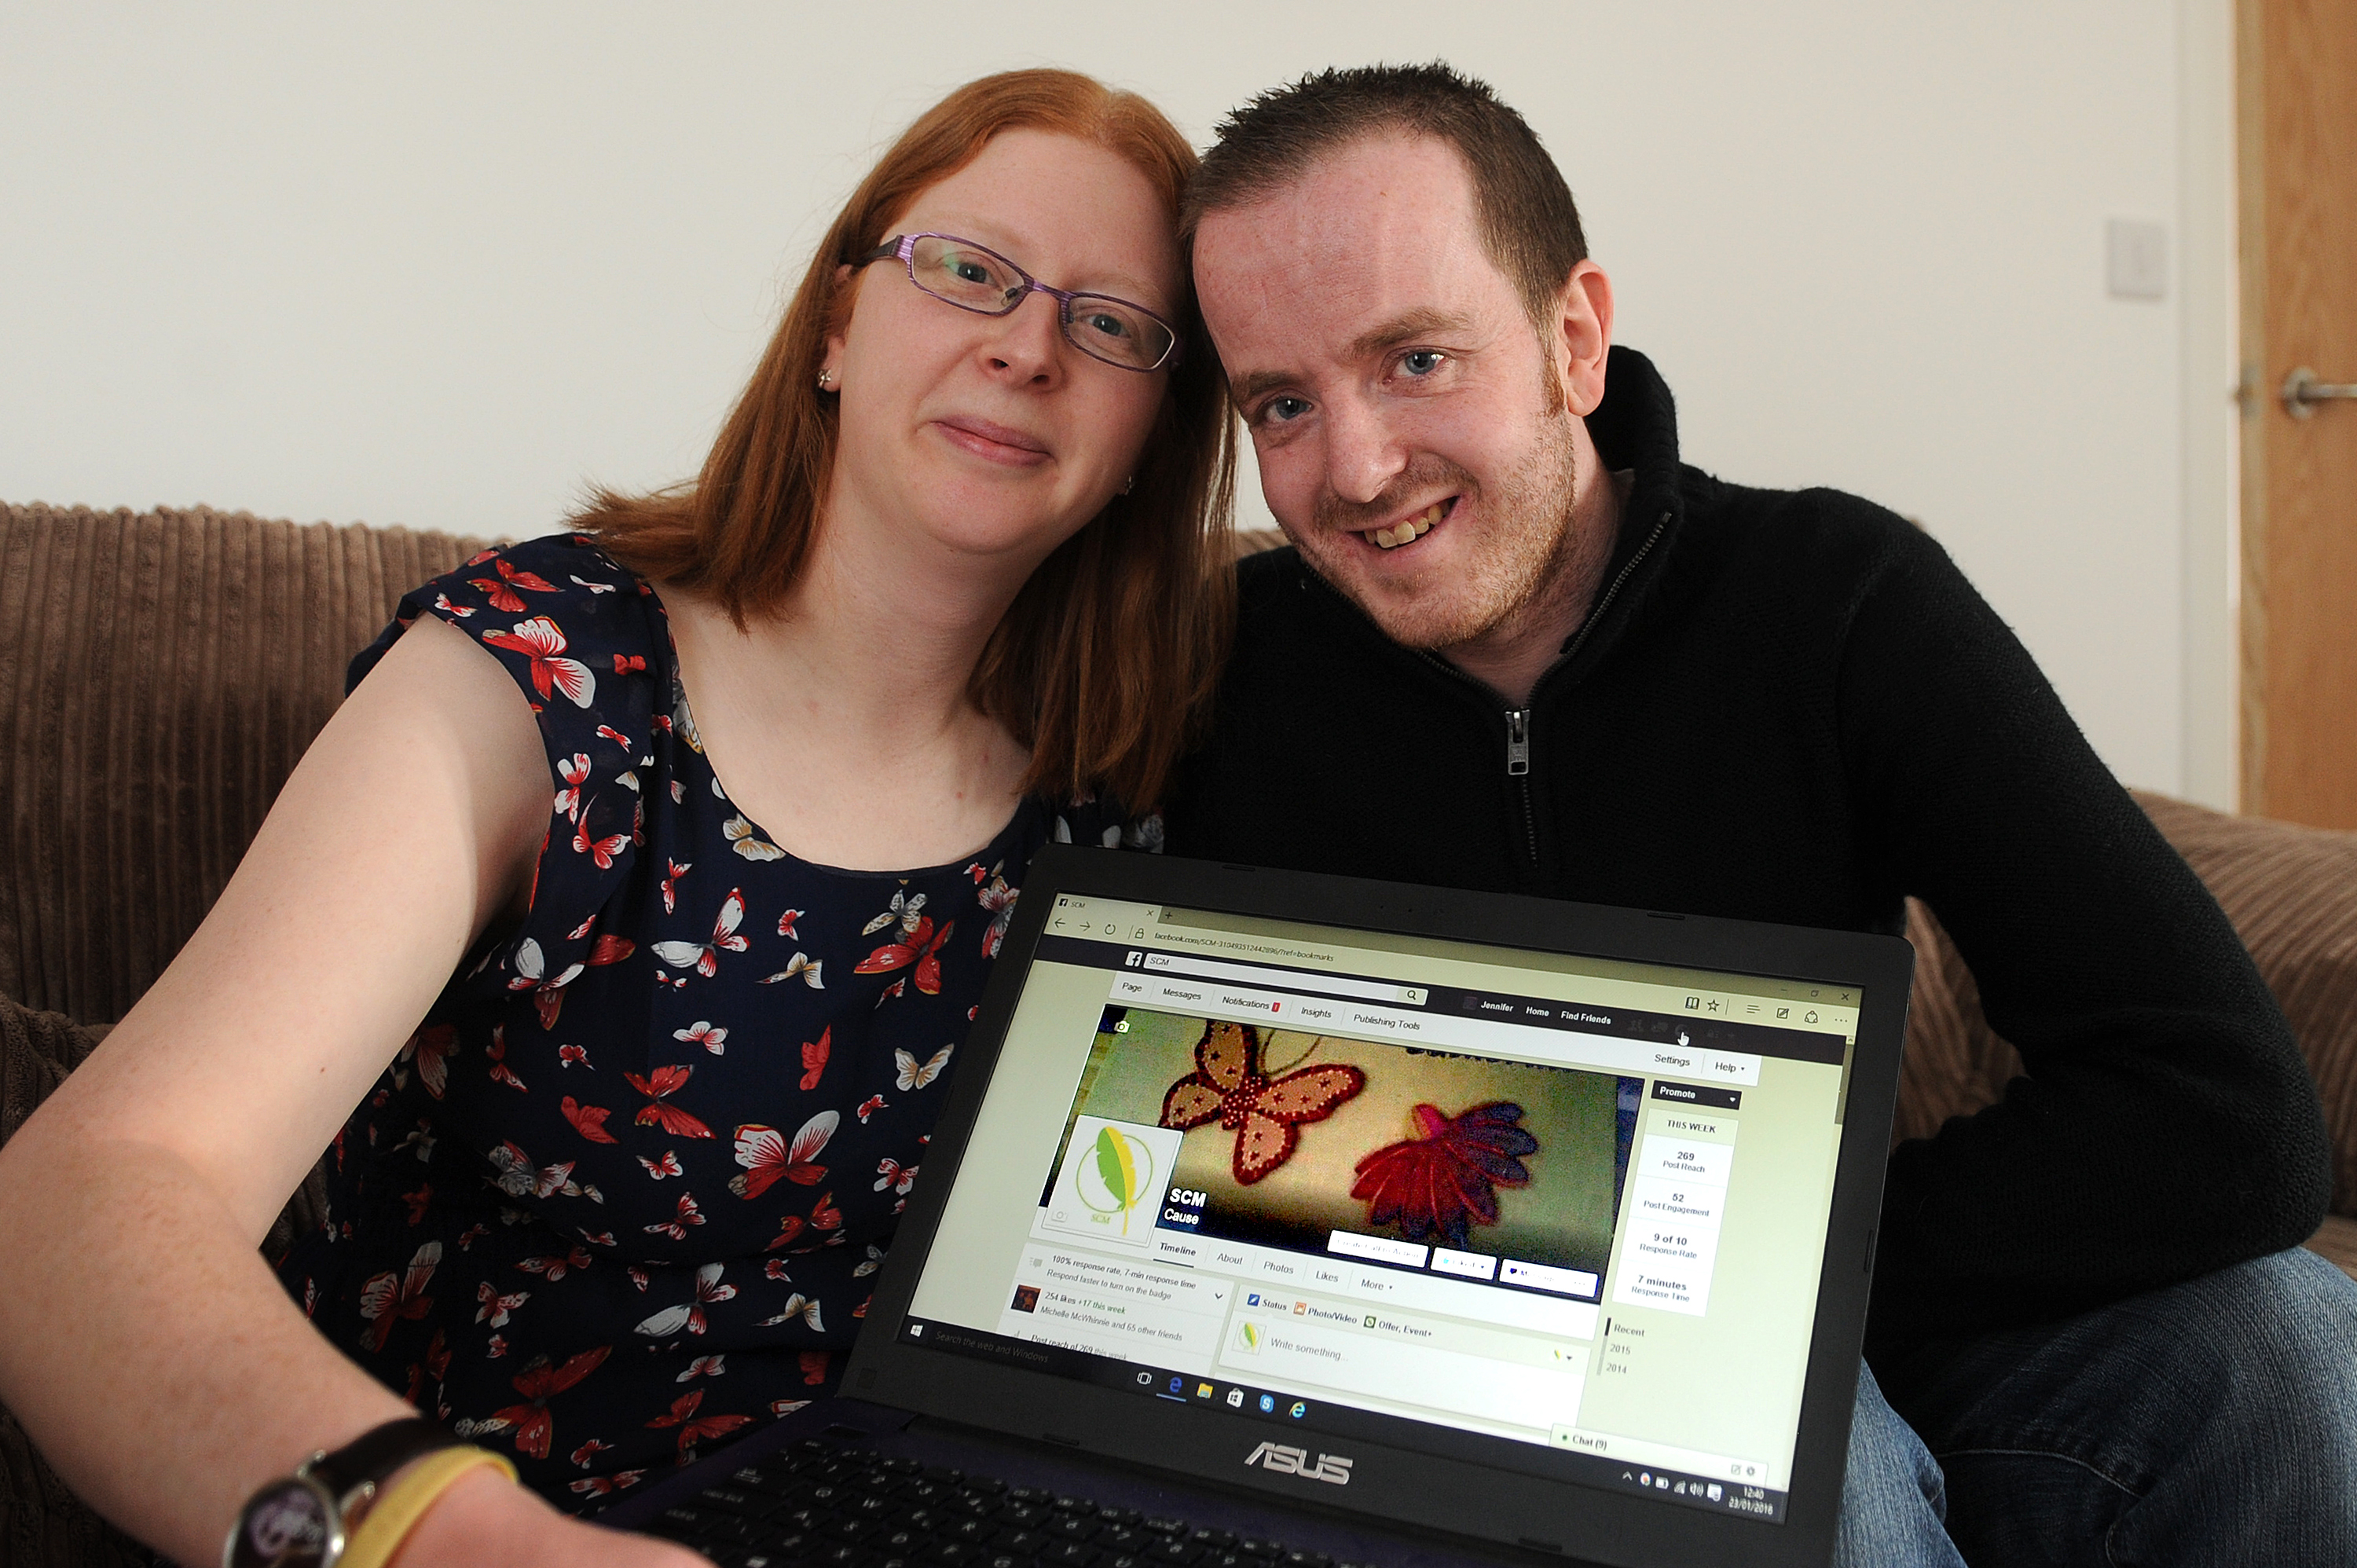 Jennifer and Paul Mills  set up a charity to help provide bereaved parents with baby memorials.